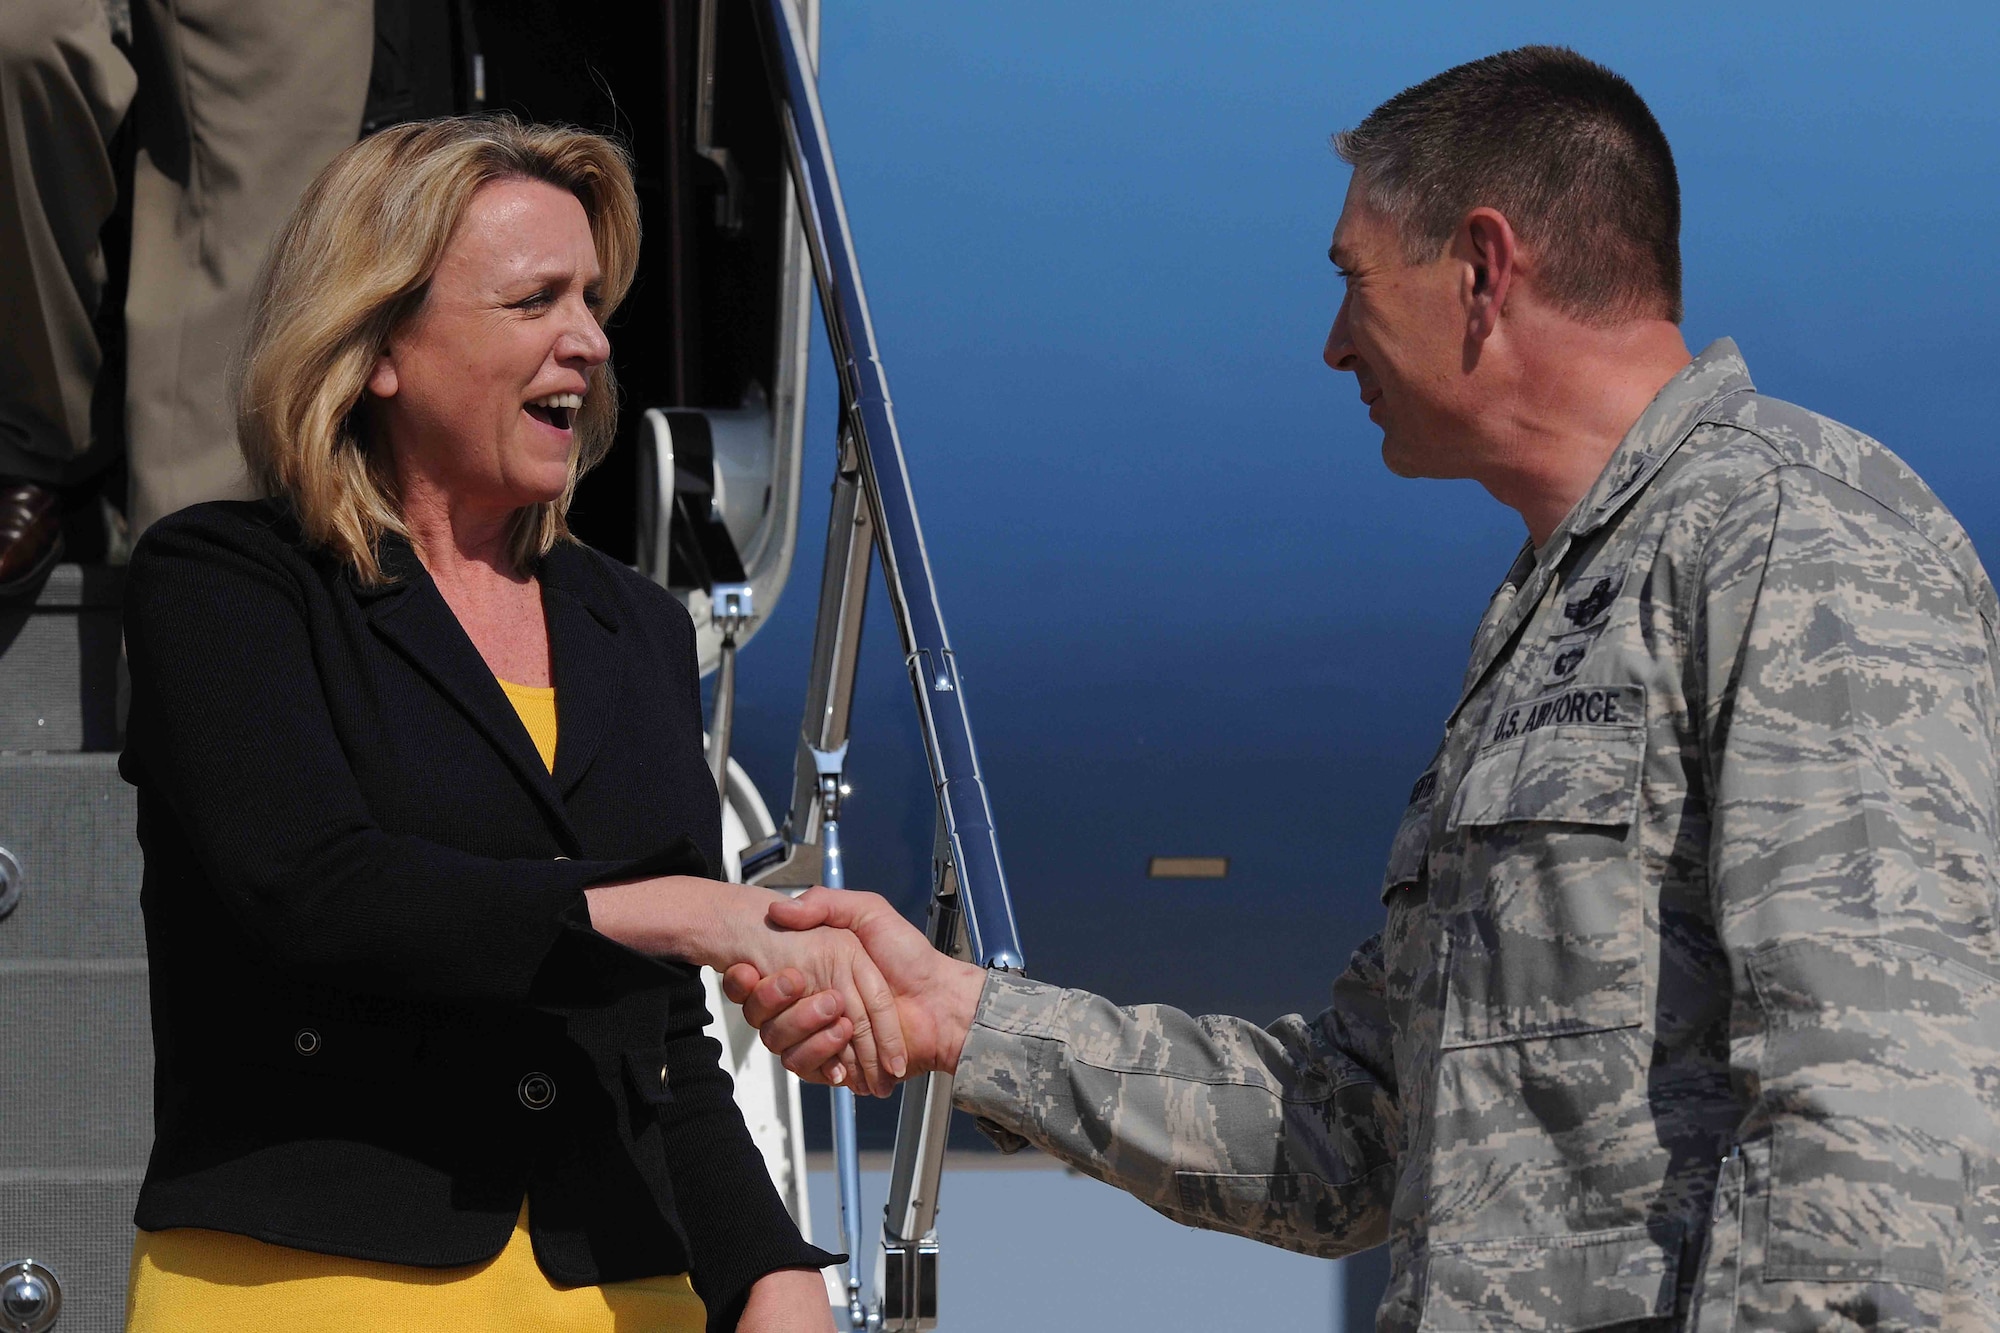 Secretary of the Air Force Deborah Lee James is greeted by Col. Bill Spangenthal during a base visit, April 23 , 2014, at Altus Air Force Base, Okla. James conducted a base visit with Altus AFB Airmen to get a firsthand view of the base’s mission and initiatives. Spangenthal is the 97th Mobility Wing commander. (U.S. Air Force photo/Senior Airman Jesse Lopez)